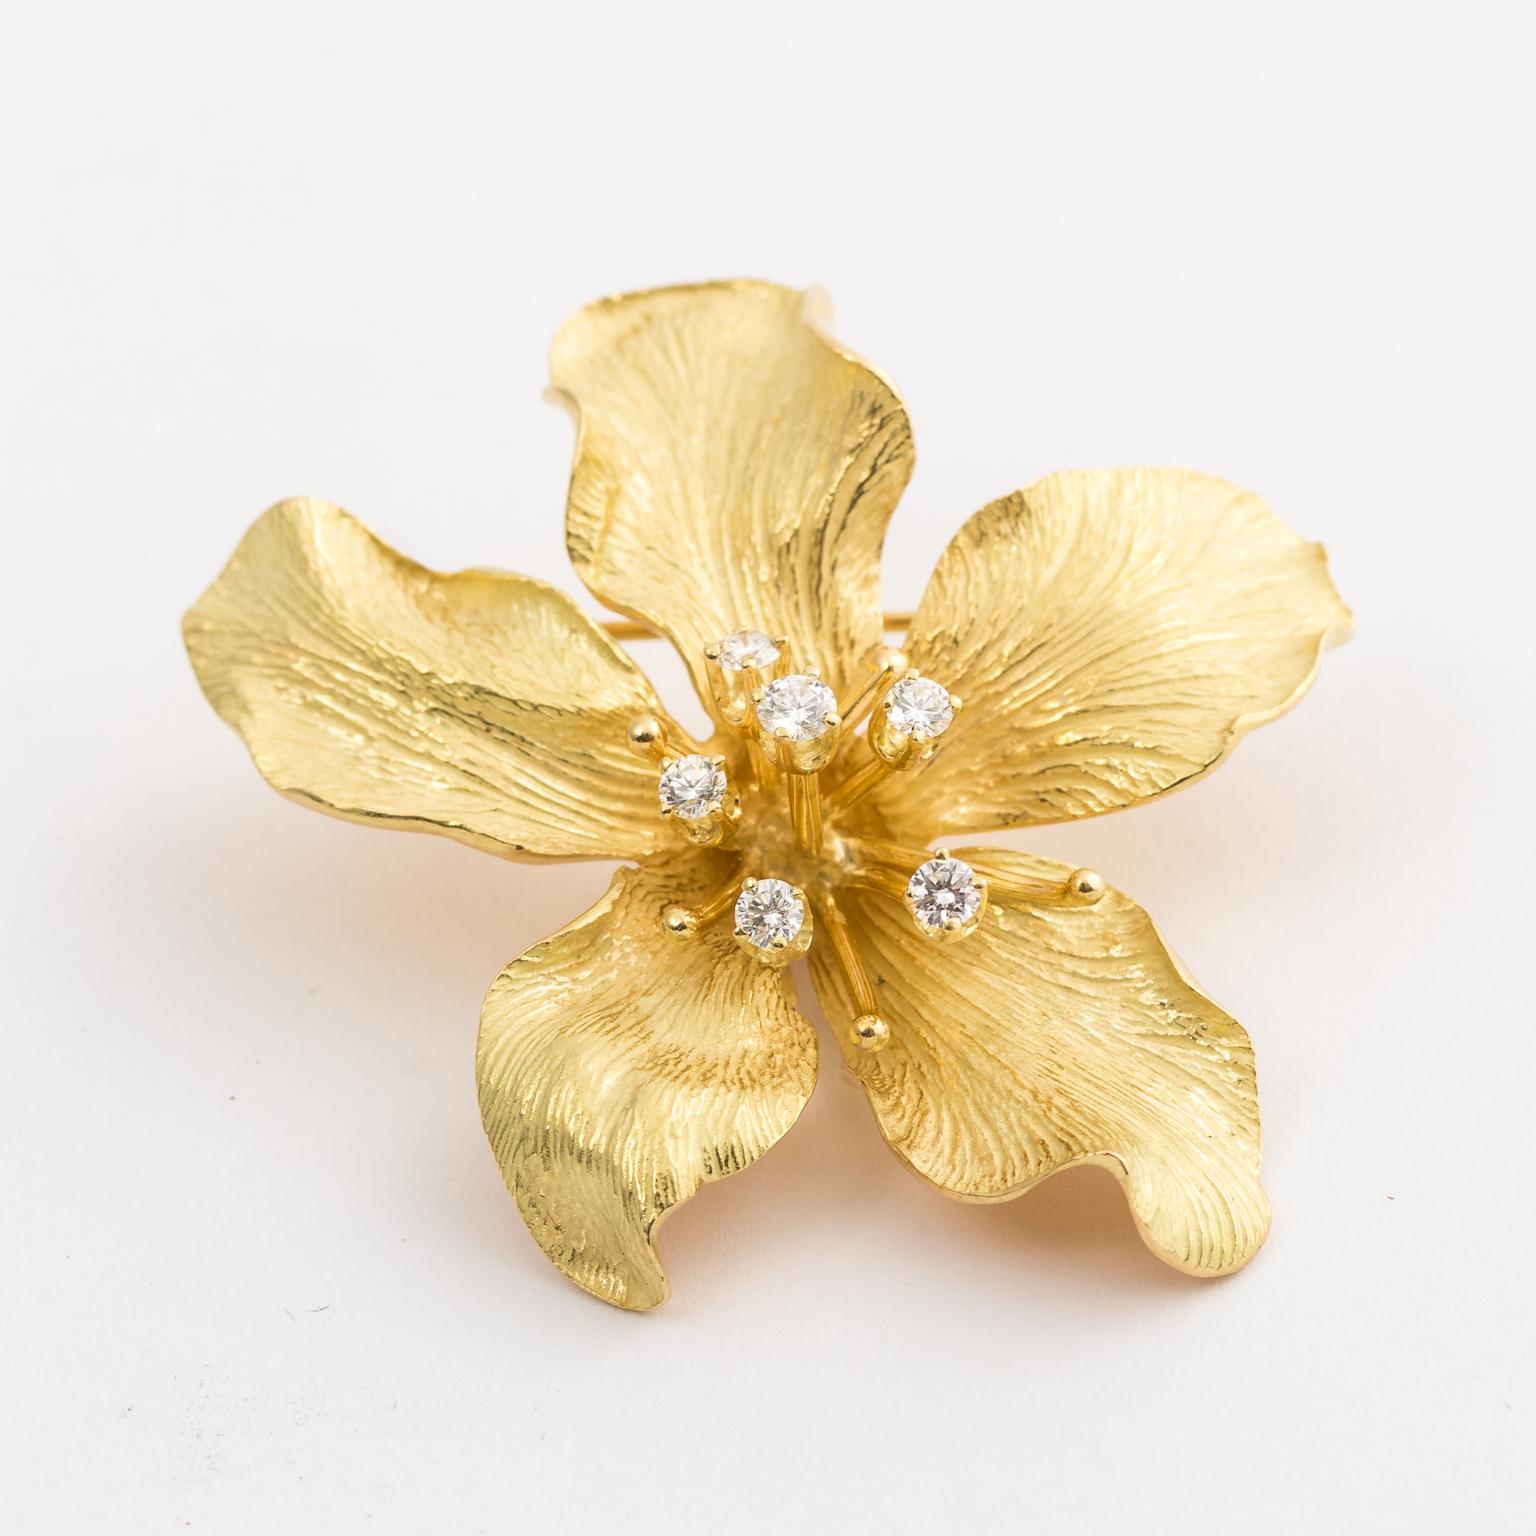 Made by Tiffany & Co, the details on this brooch are meticulous as well as sculptural. Composed of solid yellow gold, the piece weighs 17.8 grams. There are 5 brilliant diamonds, measure 2.2 - 2.8 points with a total estimated 28 points. The brooch